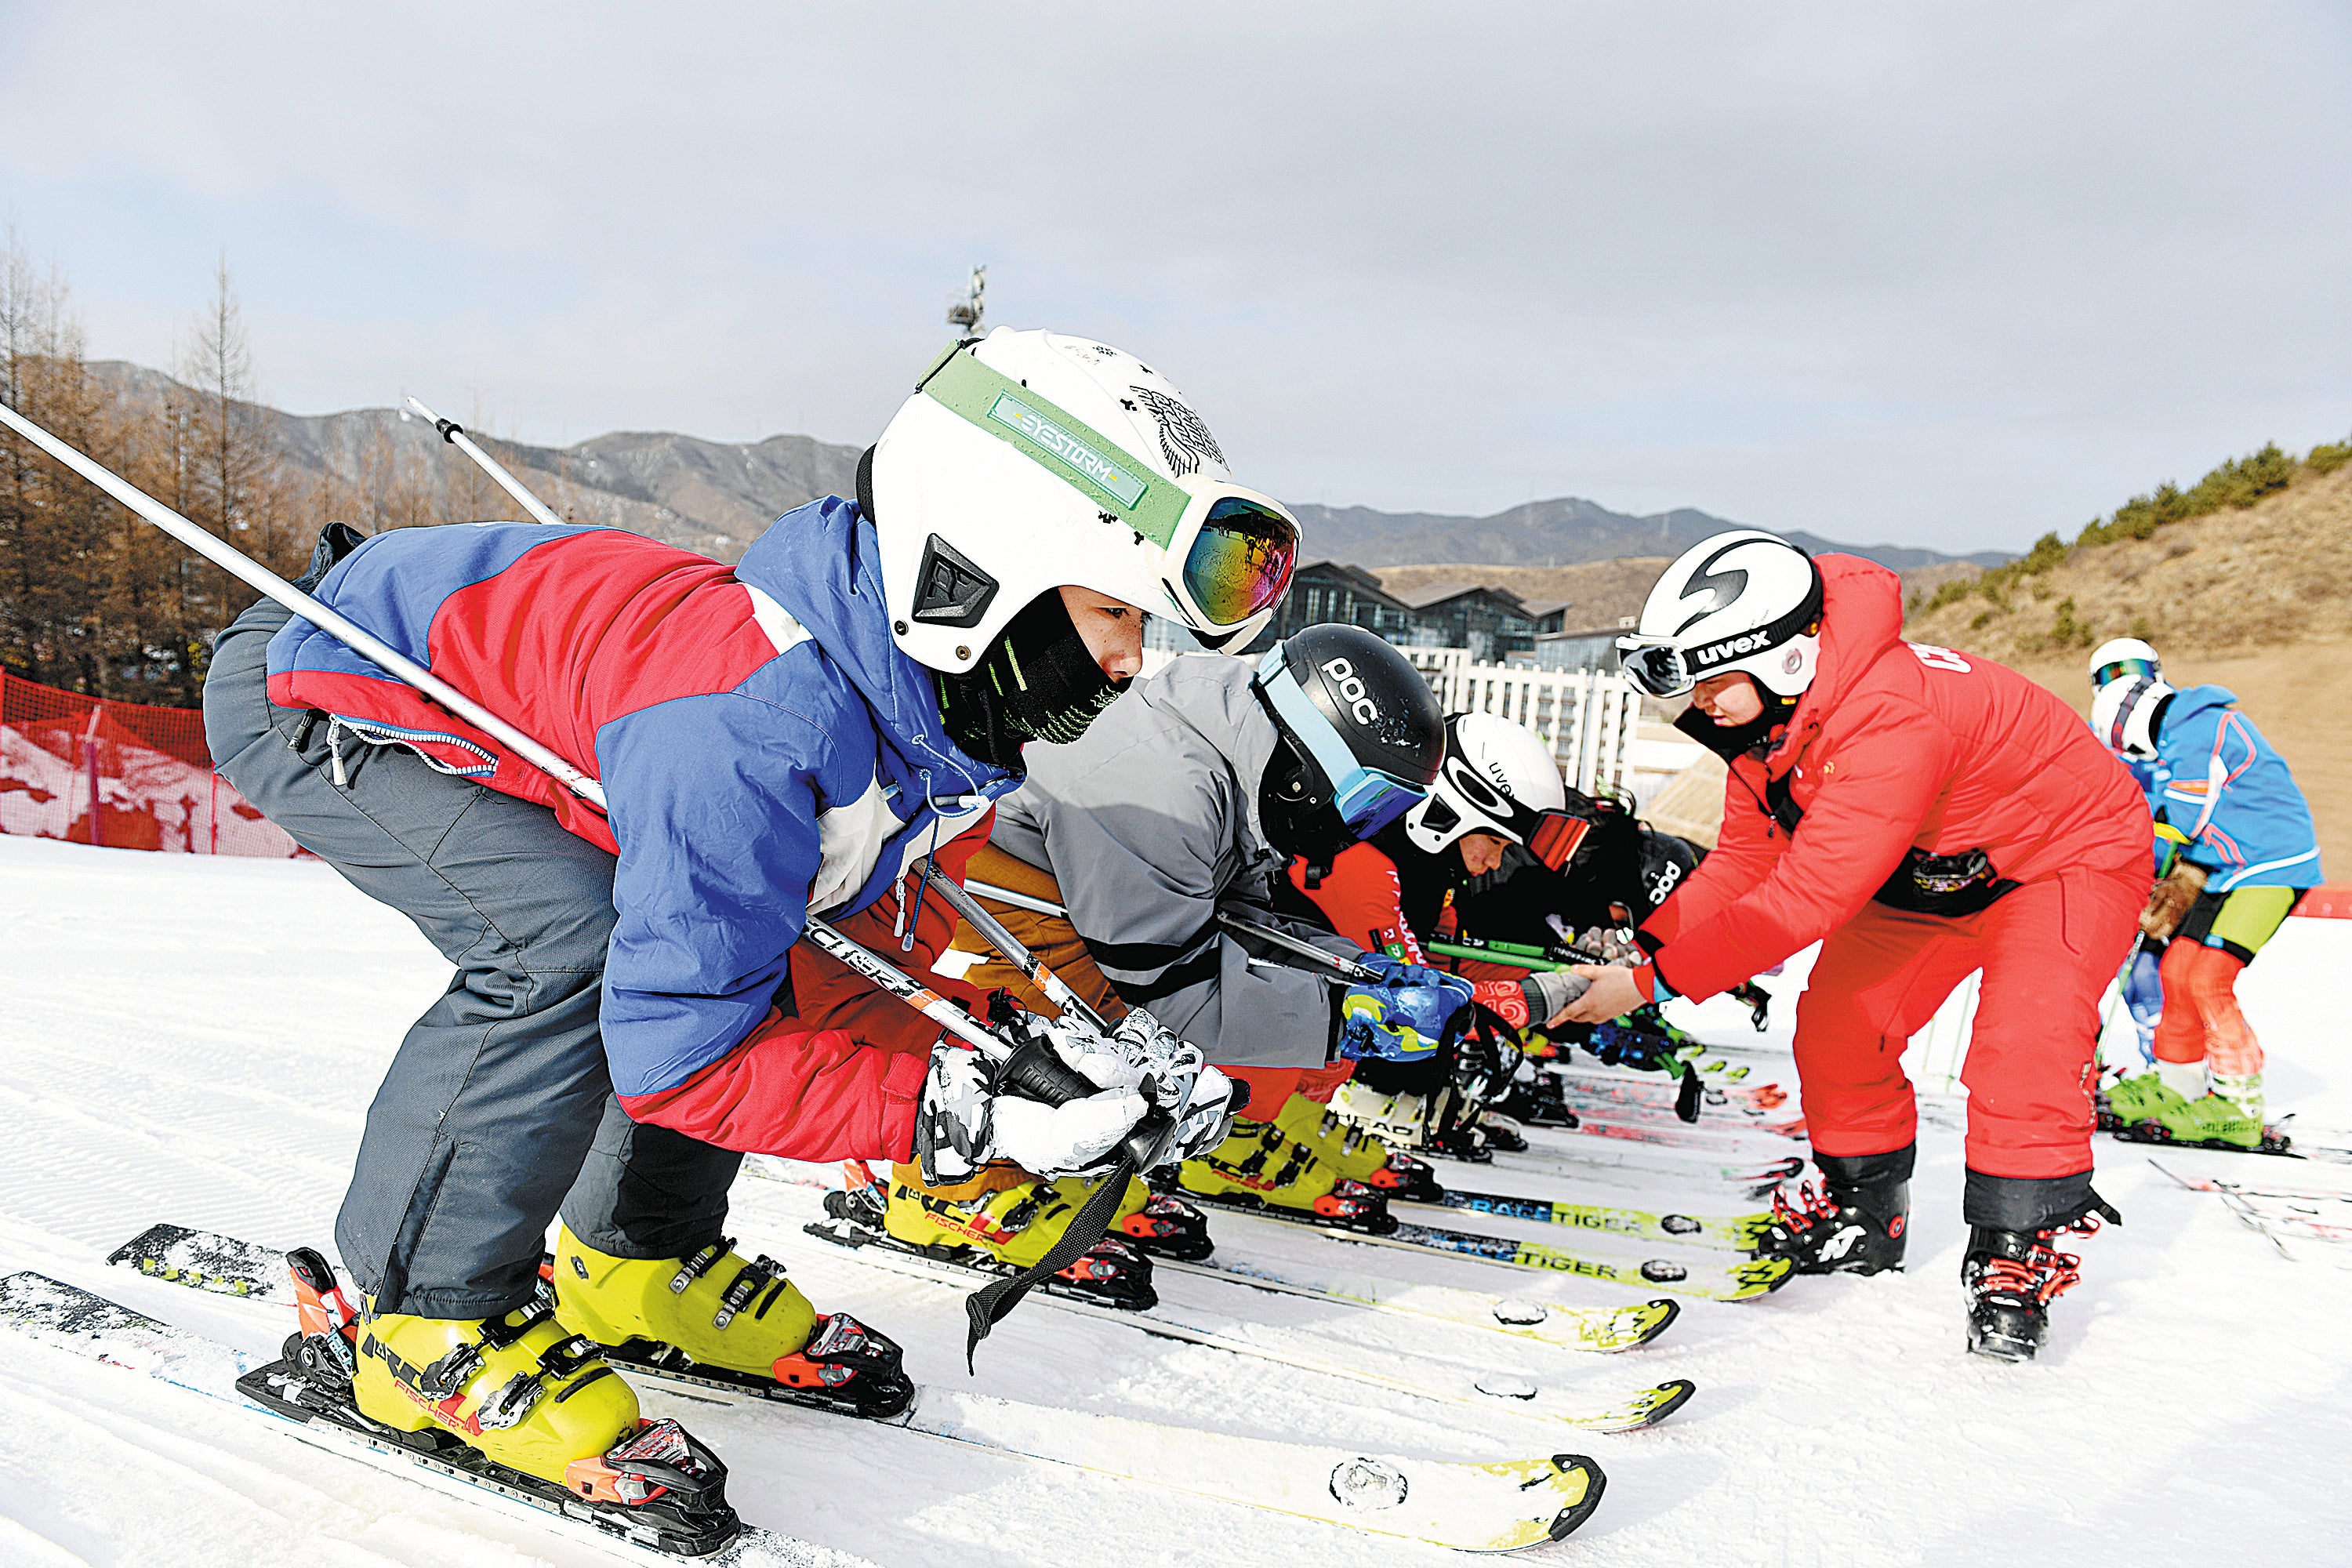 Teenagers take ski lessons at a training base in the Beijing 2022 Winter Olympics’ Zhangjiakou competition zone, North China’s Hebei province, on 15 December 2021.